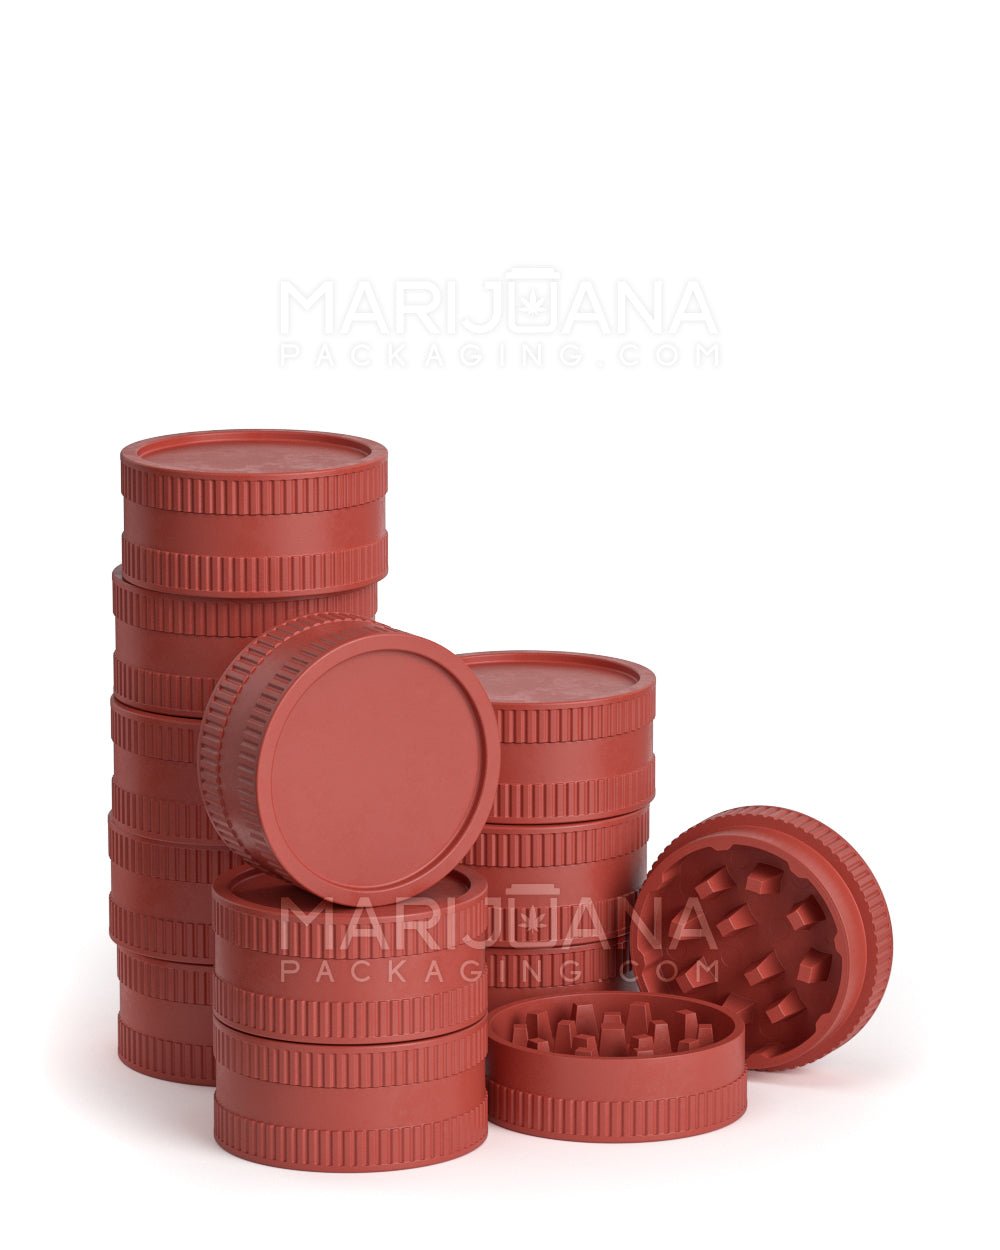 Biodegradable Thick Wall Red Grinder | 2 Piece - 55mm - 12 Count - 2